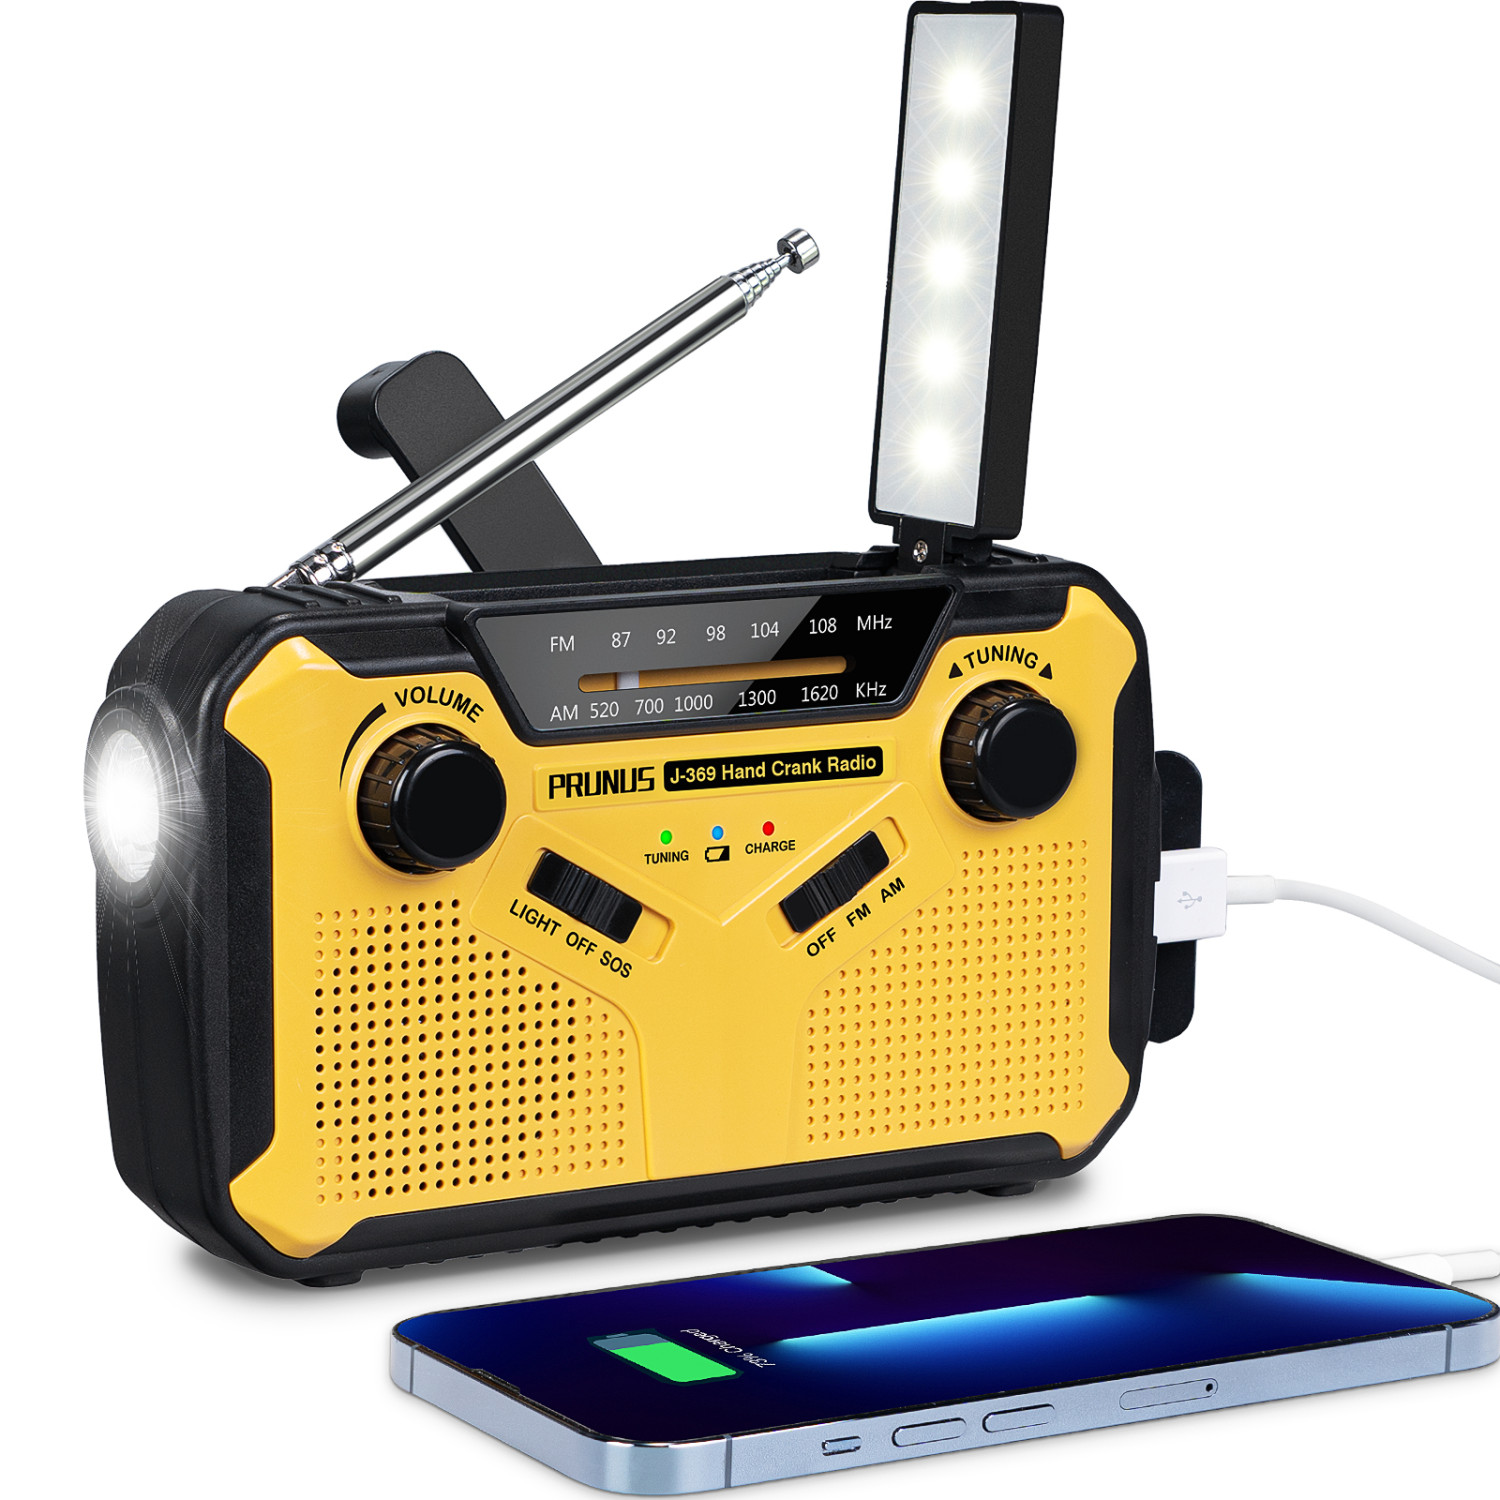 vermogen Nog steeds Noordoosten Wind Up Radios Portable, AM/FM Radio Solar, Battery Radio Hand Crank with  2500mAh Power Bank, Dynamo Radio with Torch, Reading Lamp and SOS Alarm for  Camping, Hiking and Emergencies by PRUNUS J-369